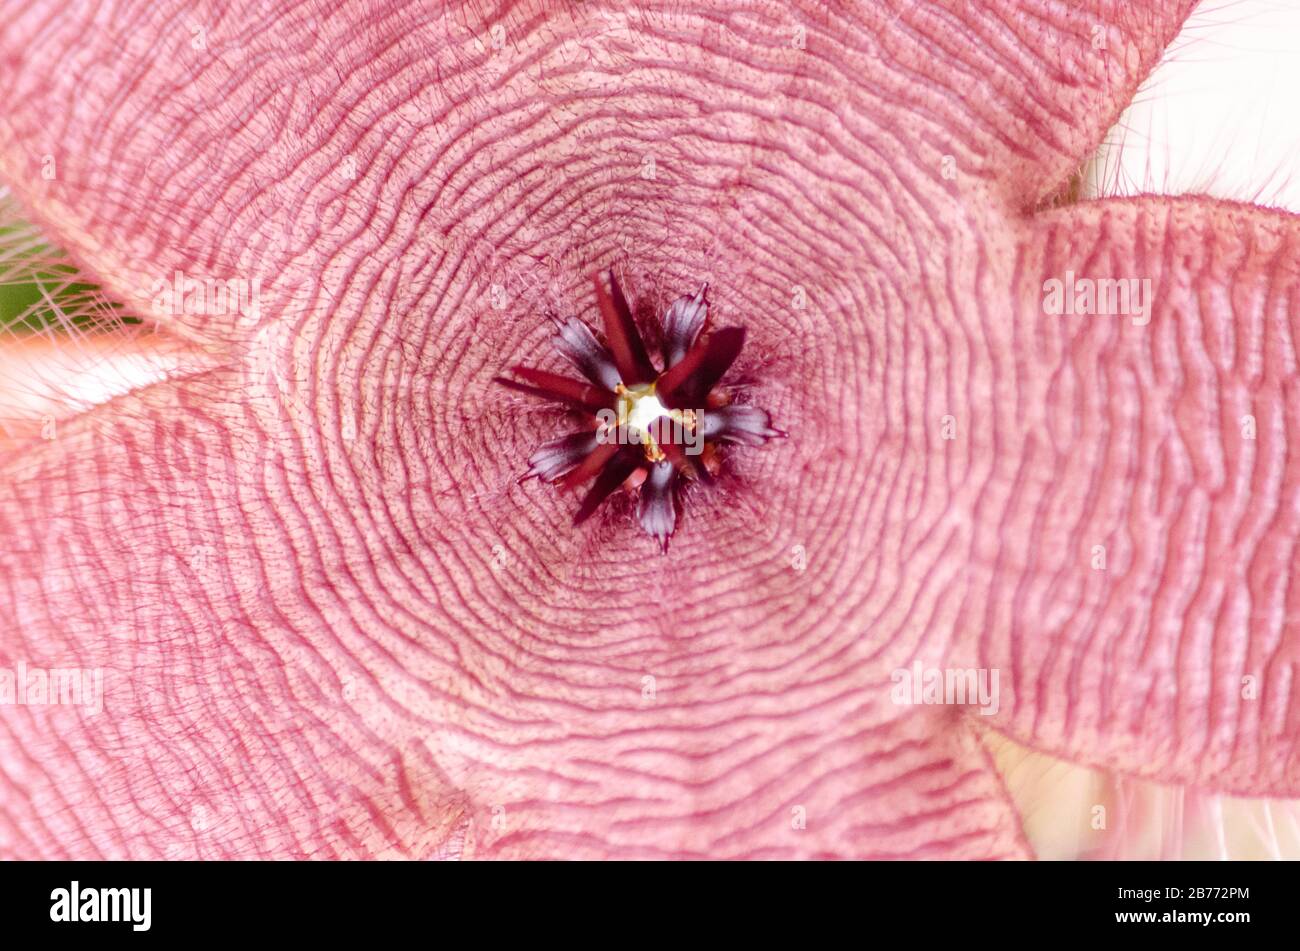 Close-up of a cactus stapelia hairy flower open Stock Photo